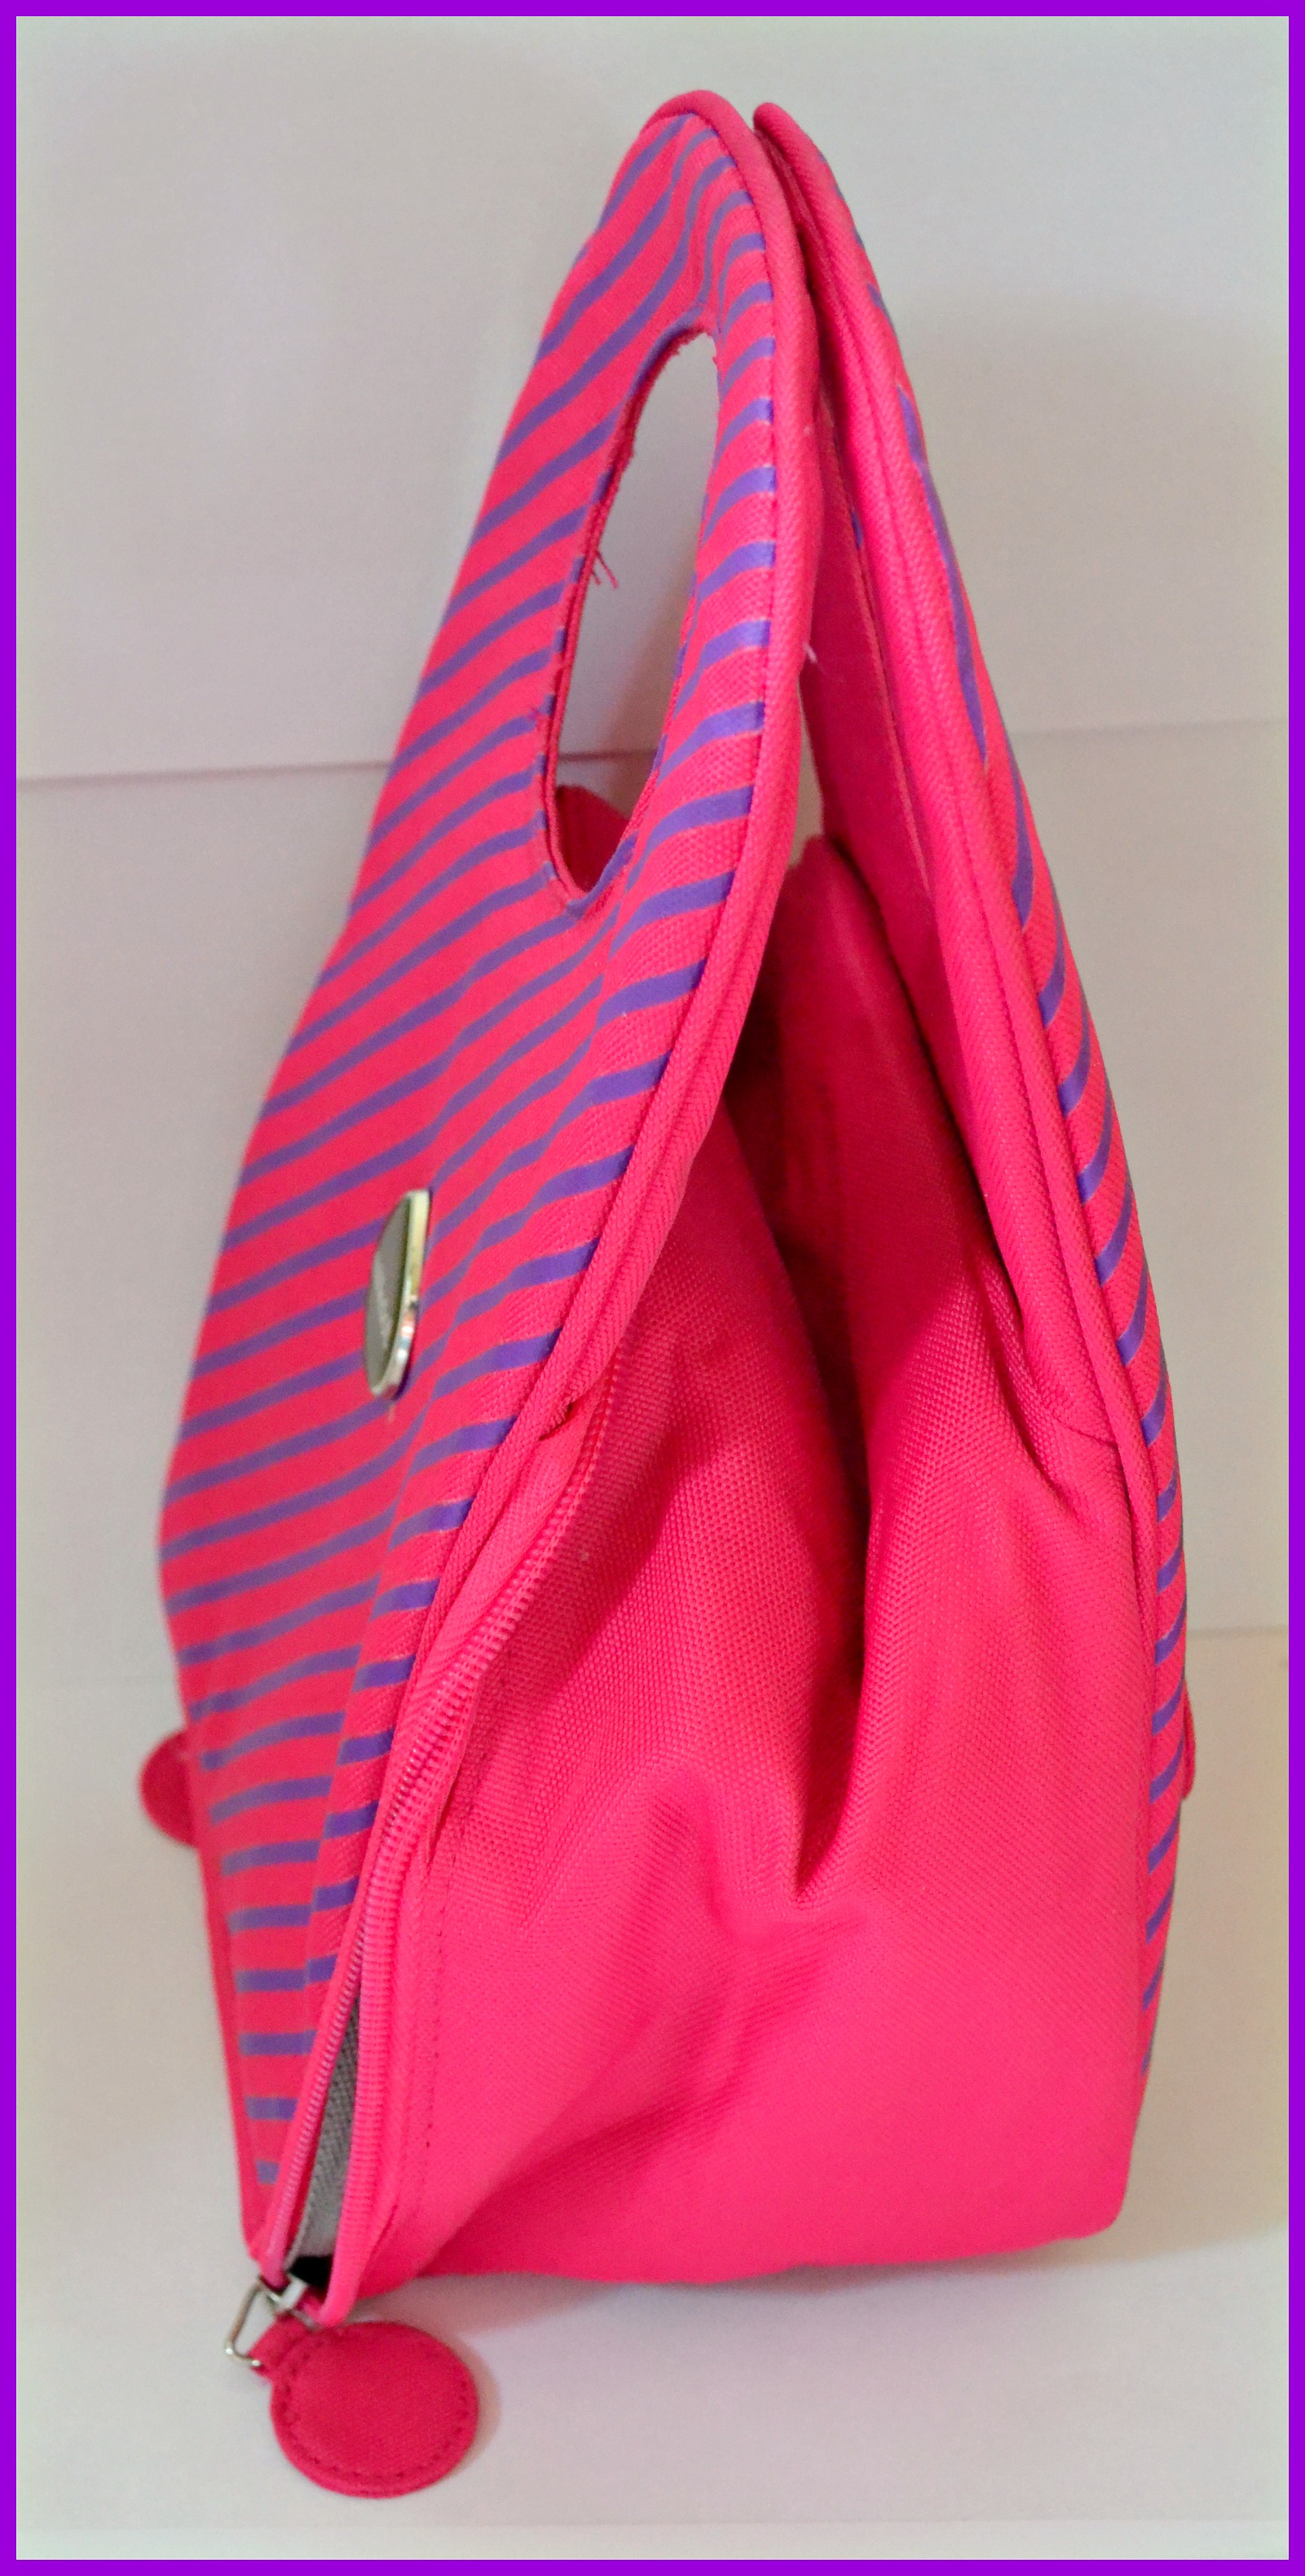 Milkdot Lunch Tote Review